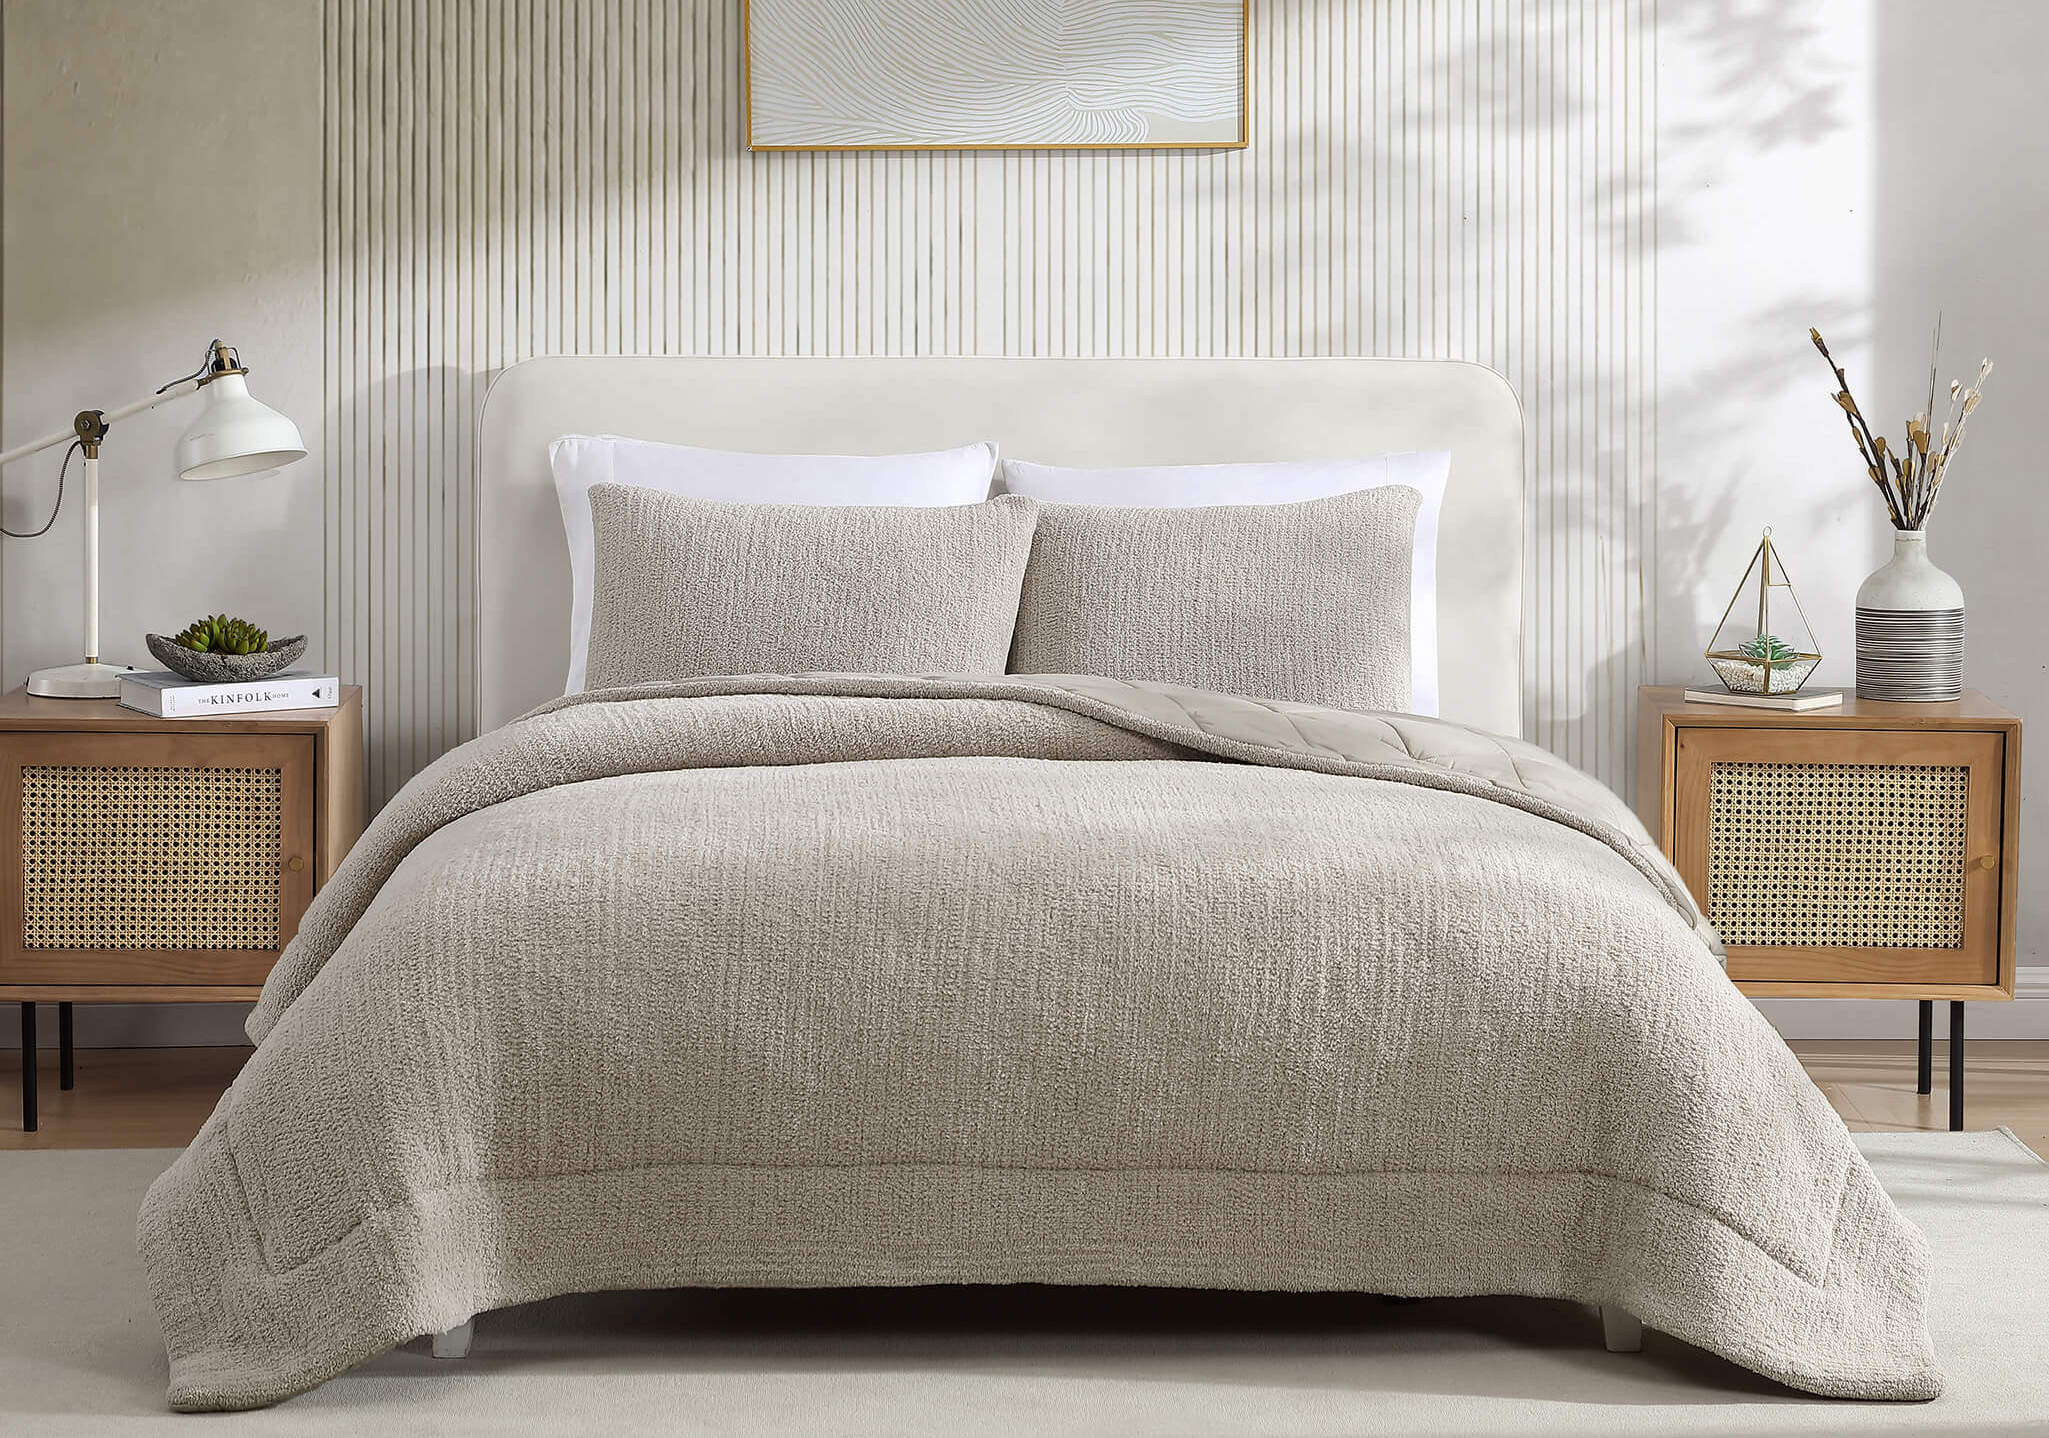 The Ultimate Guide to Choosing the Perfect Comforter for Every Season